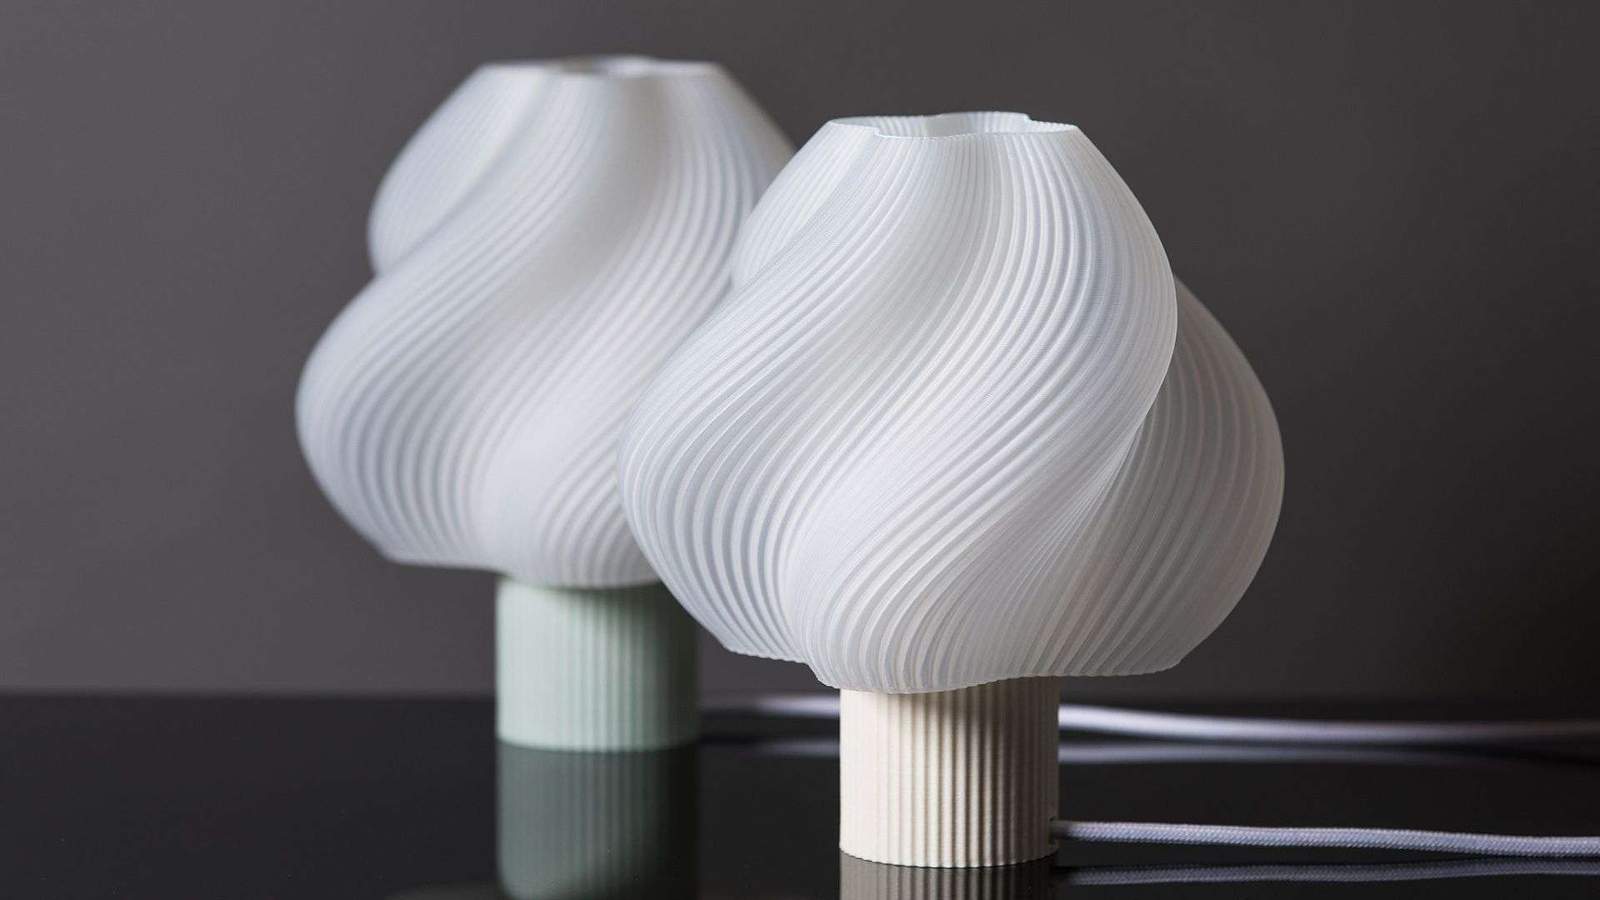 Soft Serve Lamp is inspired by ice cream